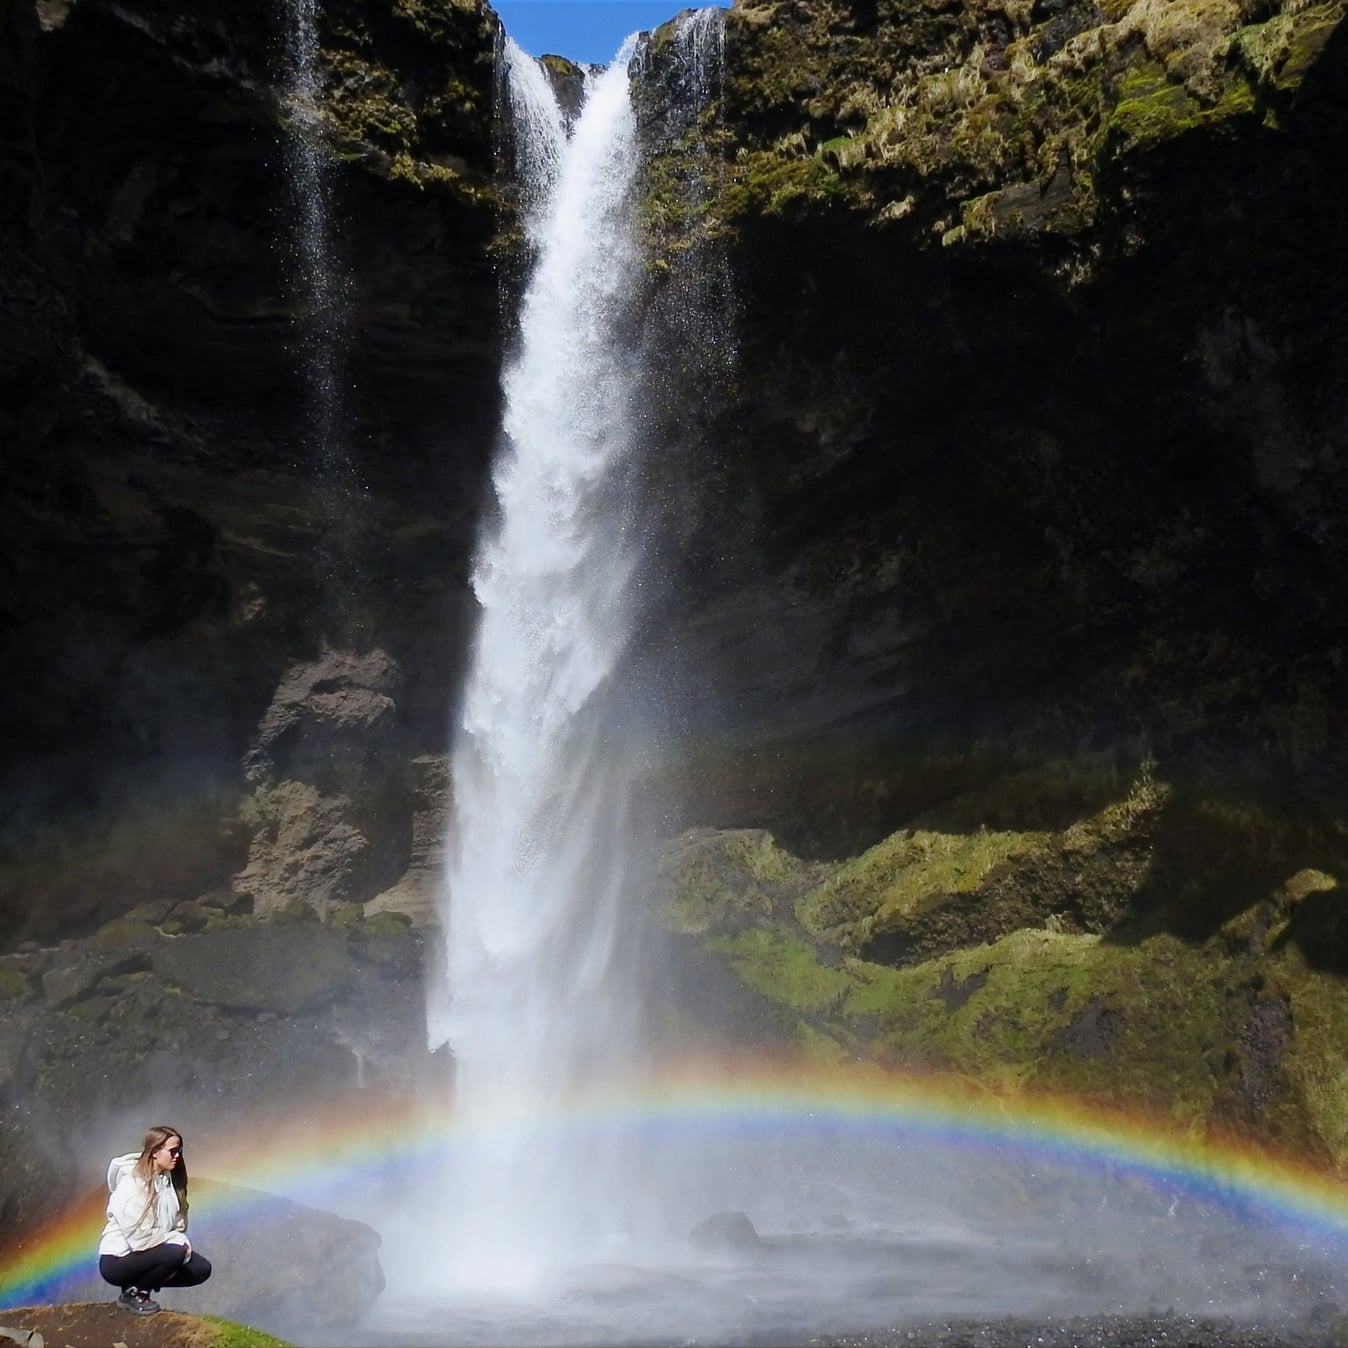 Photo showing the waterfall and rainbow.